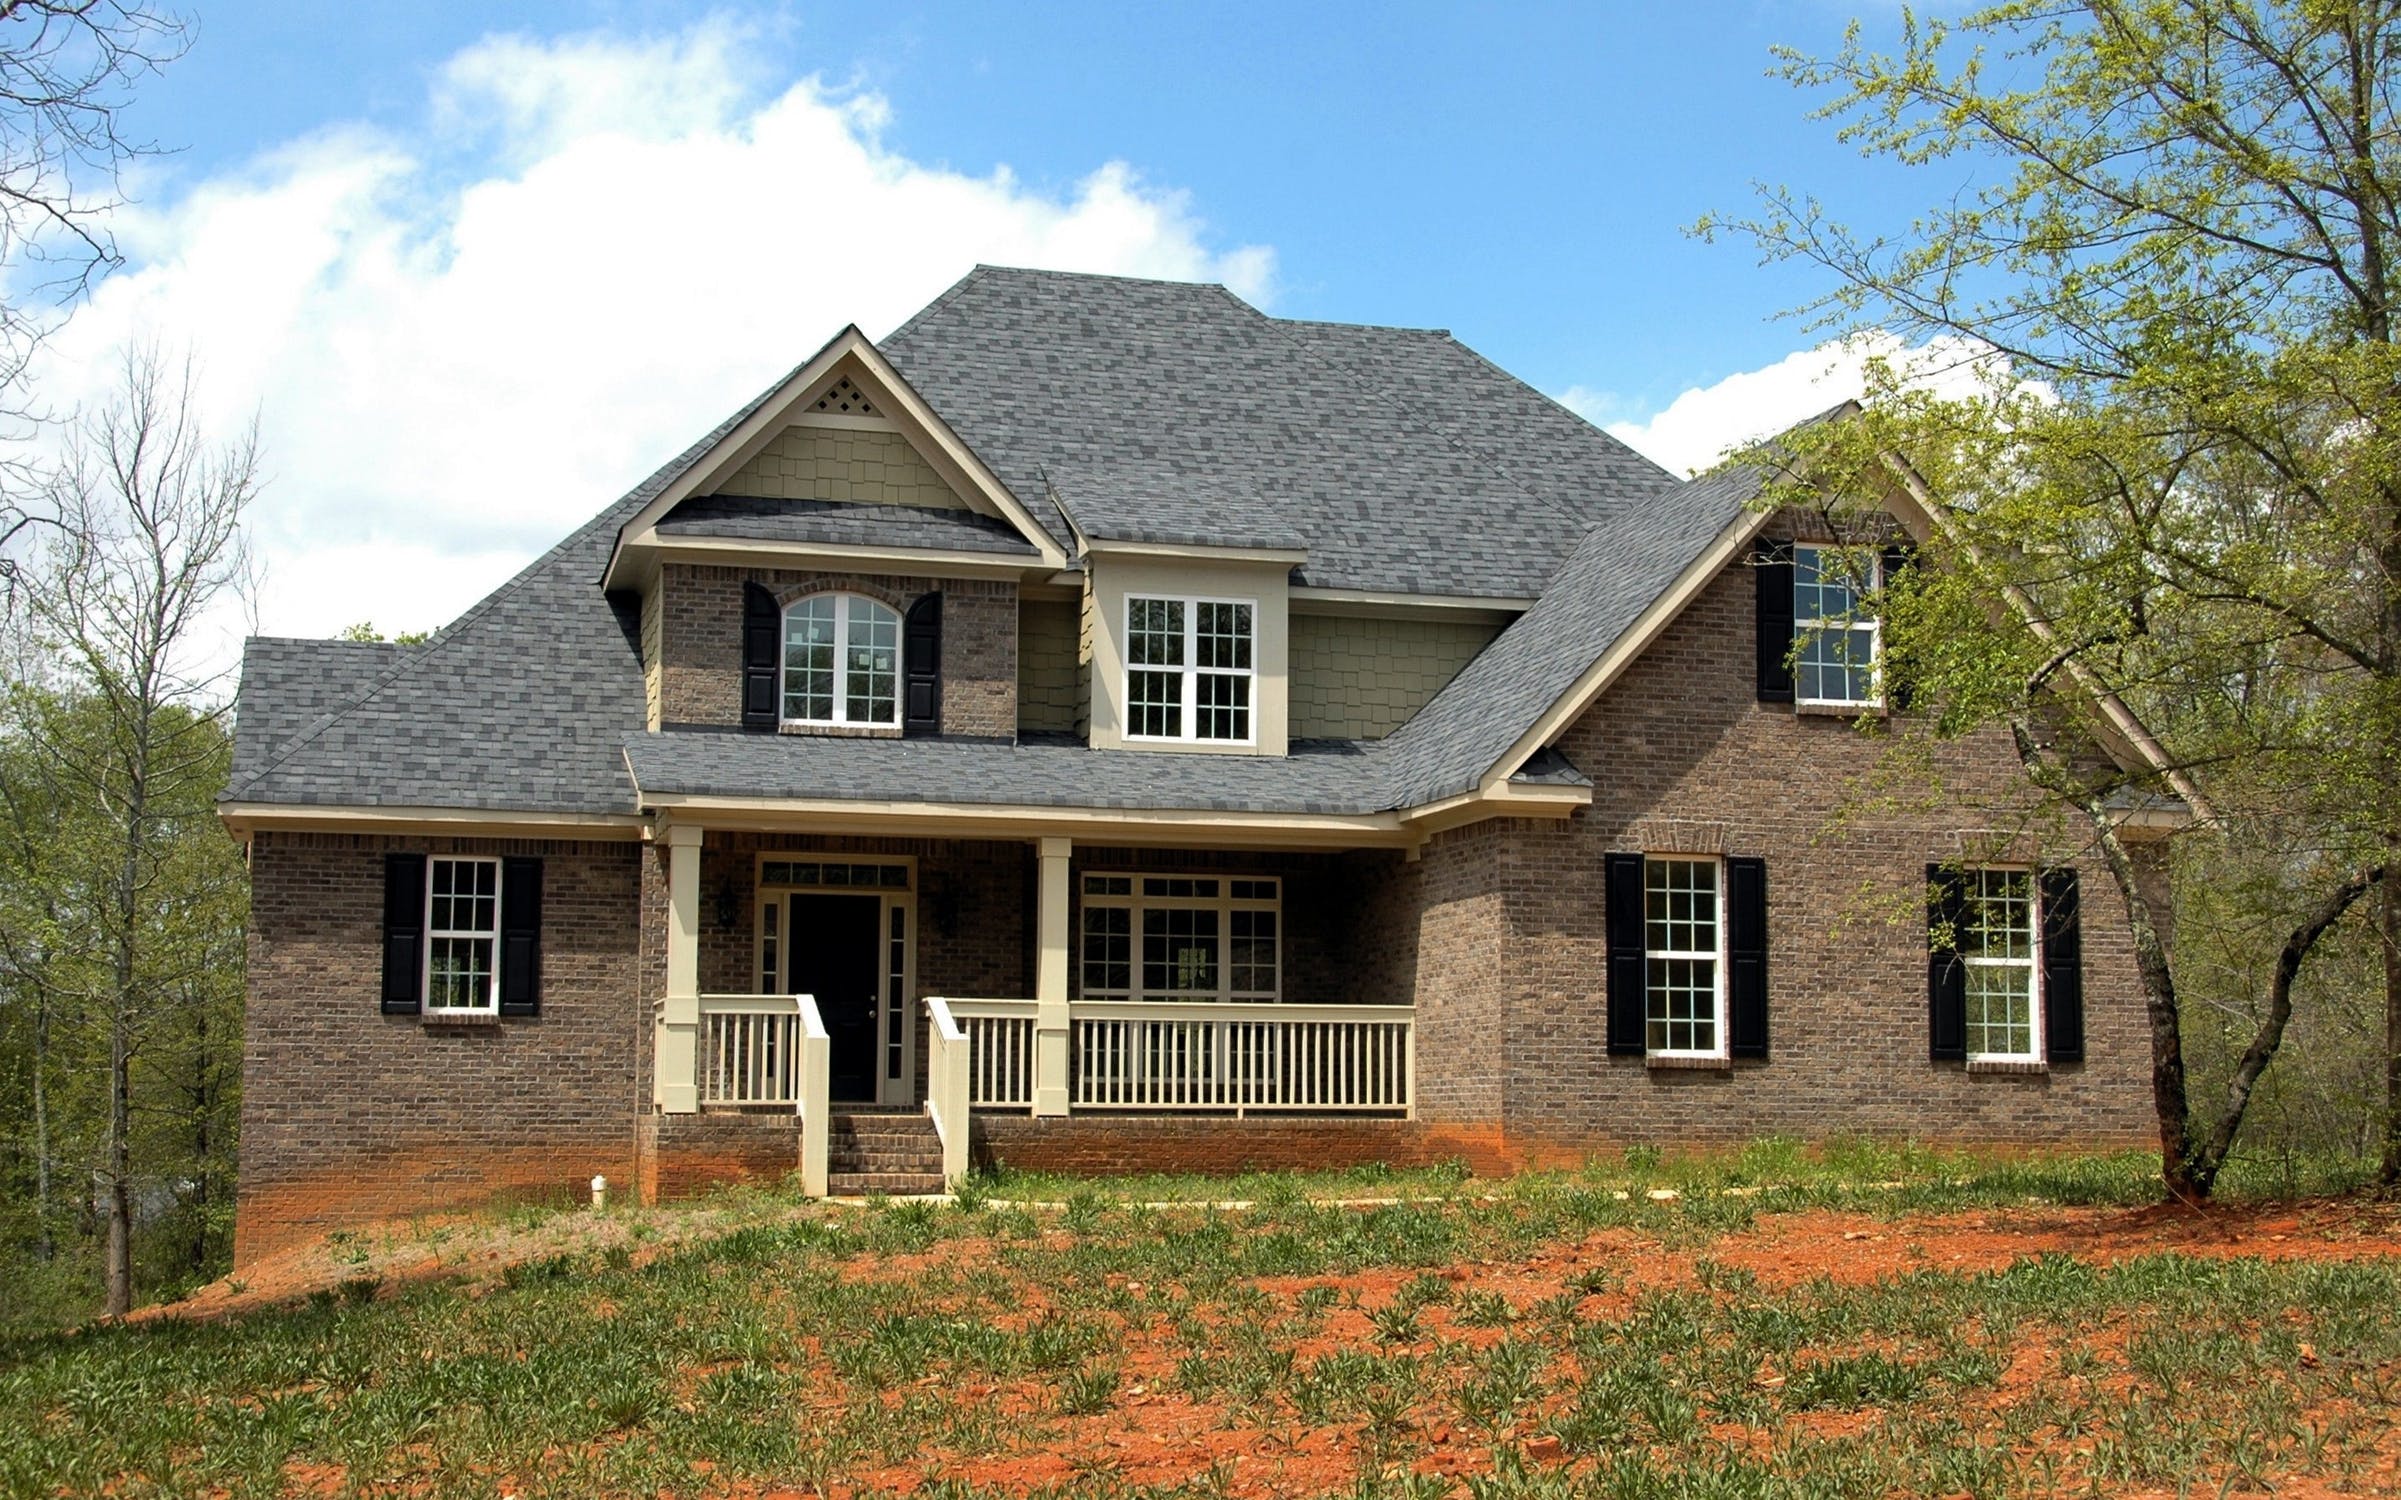 Top 4 Benefits of Installing a New Roof